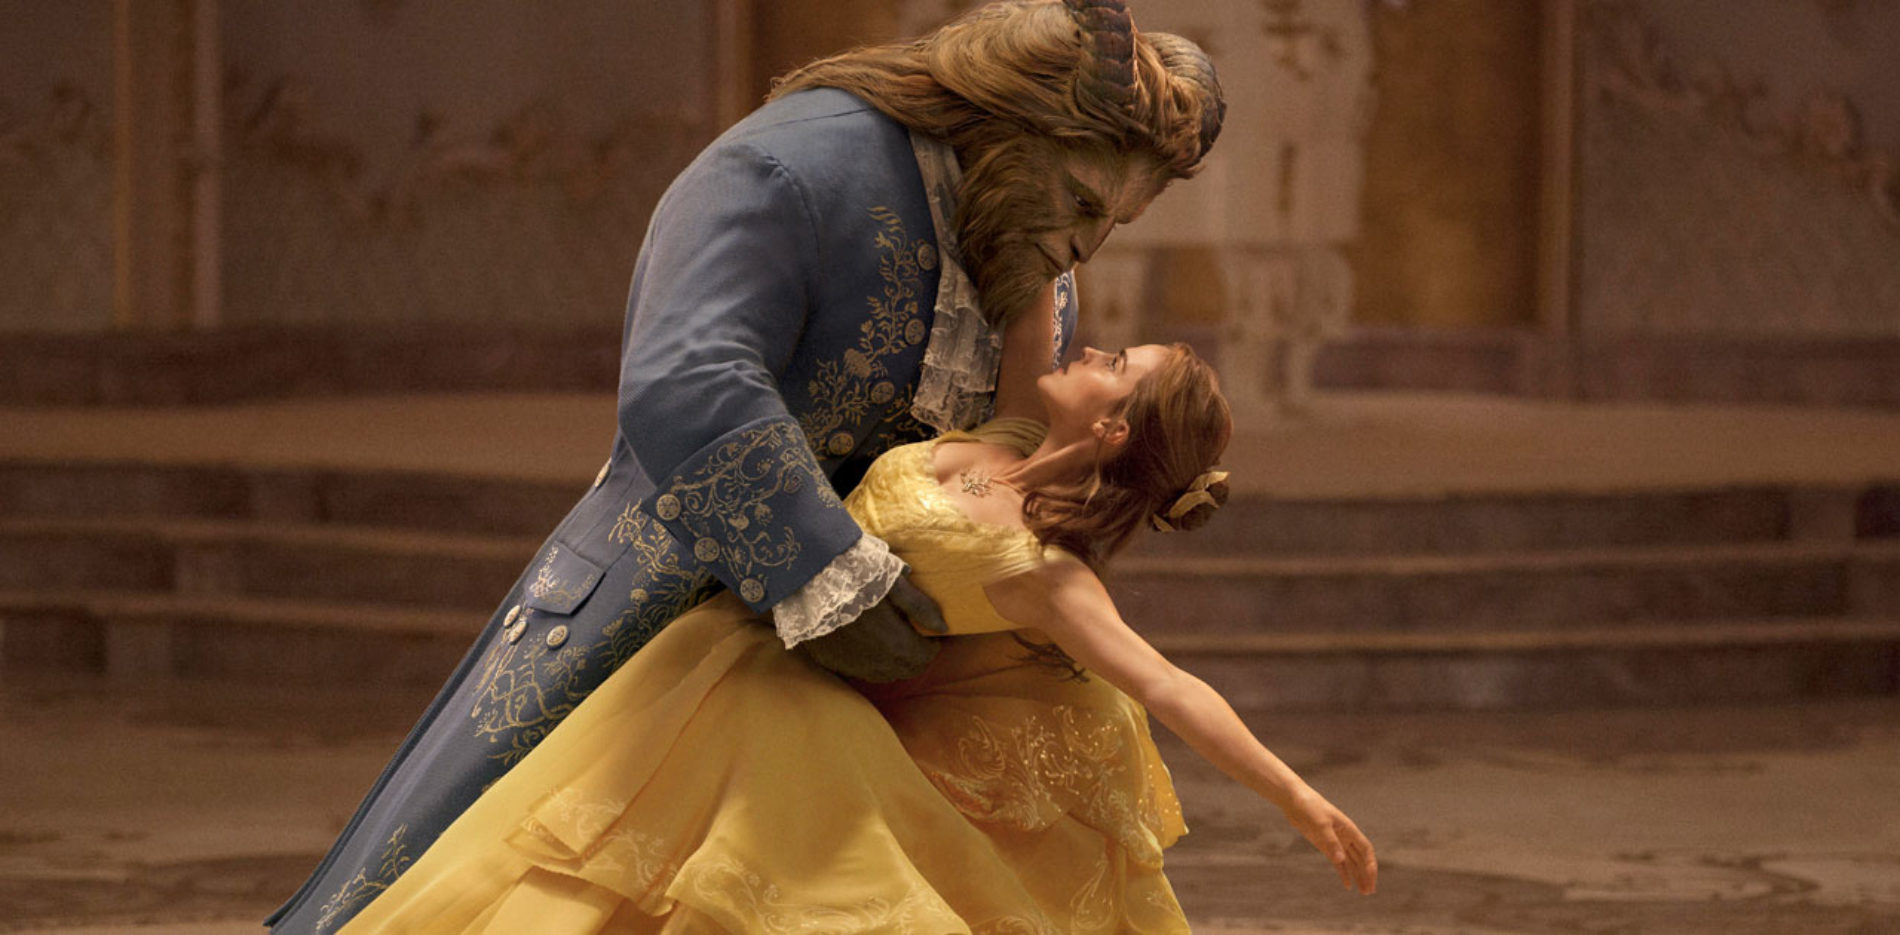 Beauty and the Beast breaks box office record in spite of antigay boycott